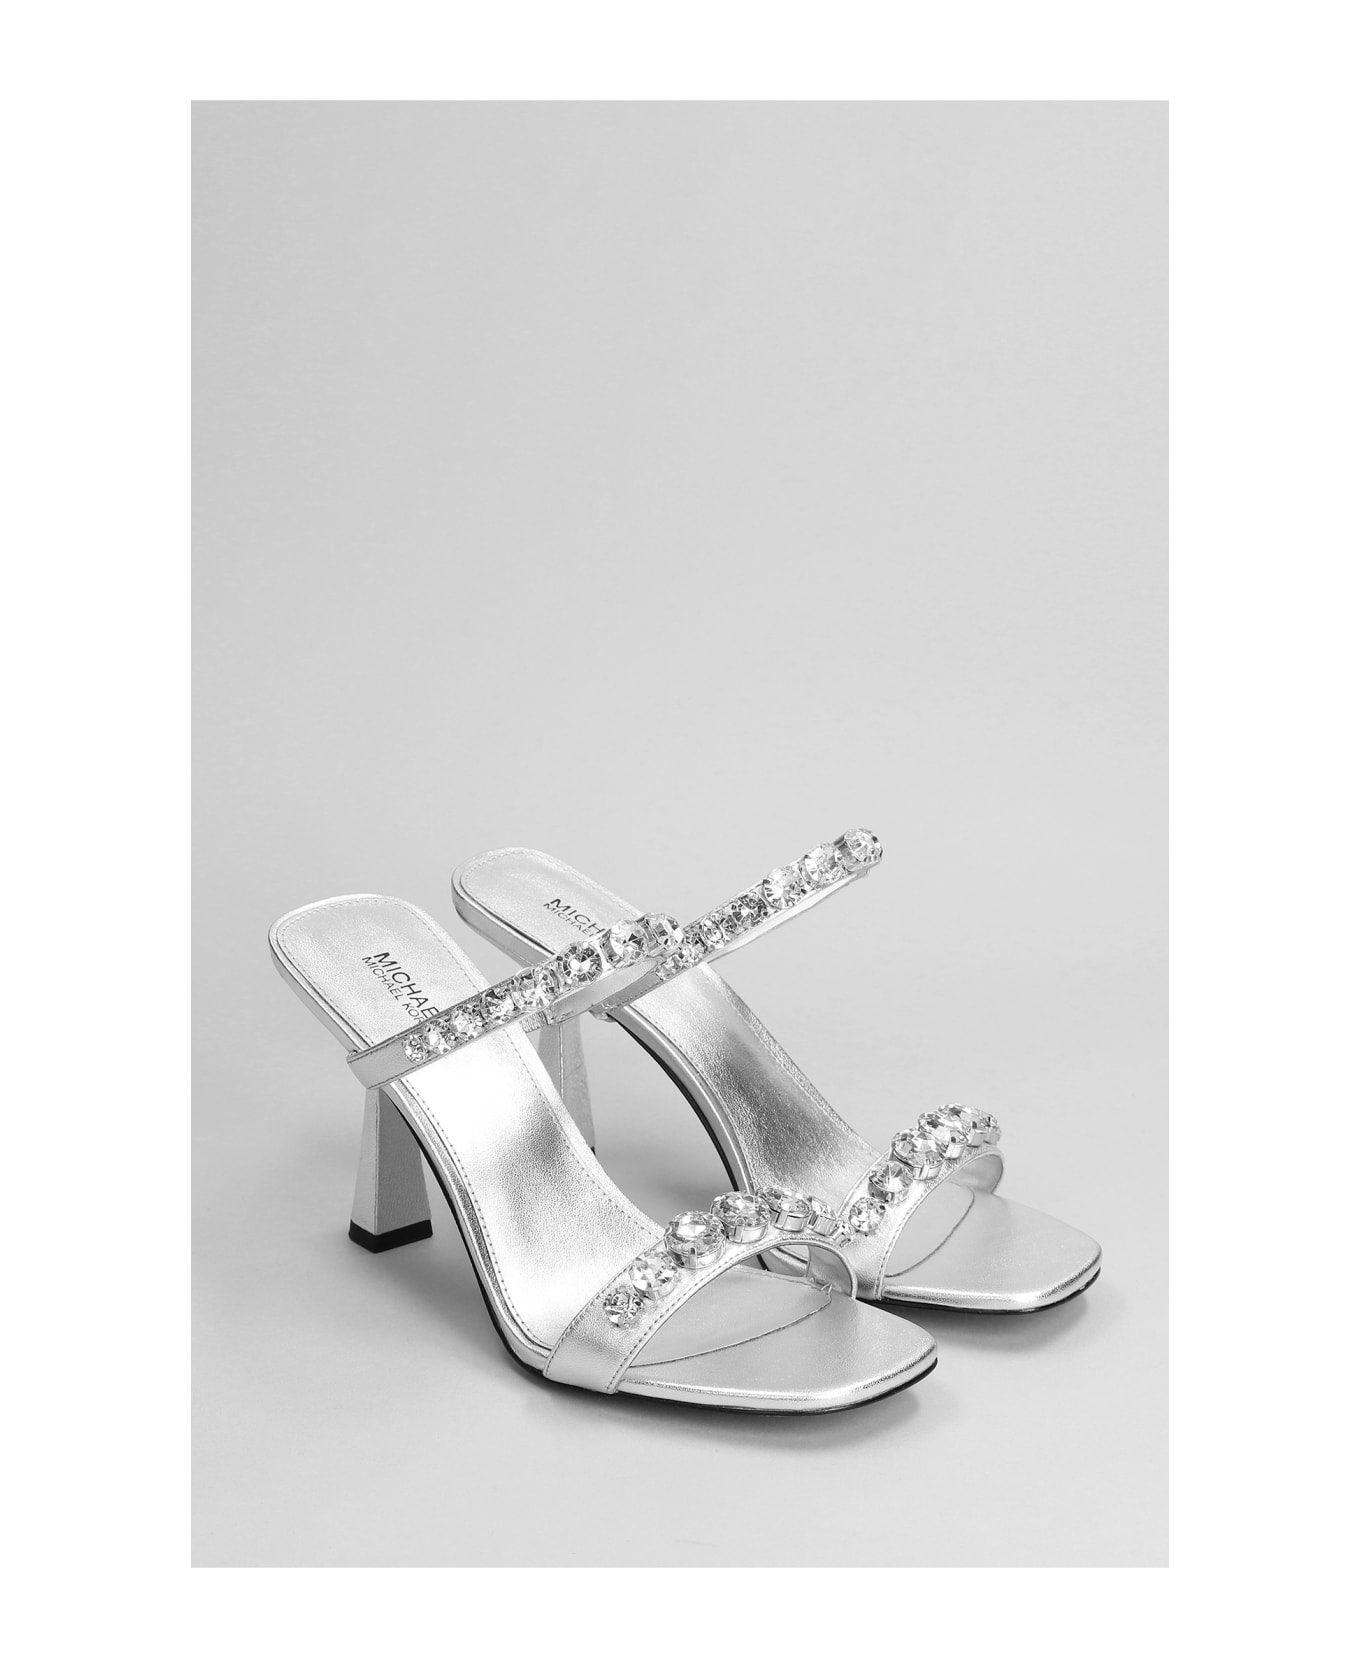 Michael Kors Clara Sandals In Silver Leather - Argento